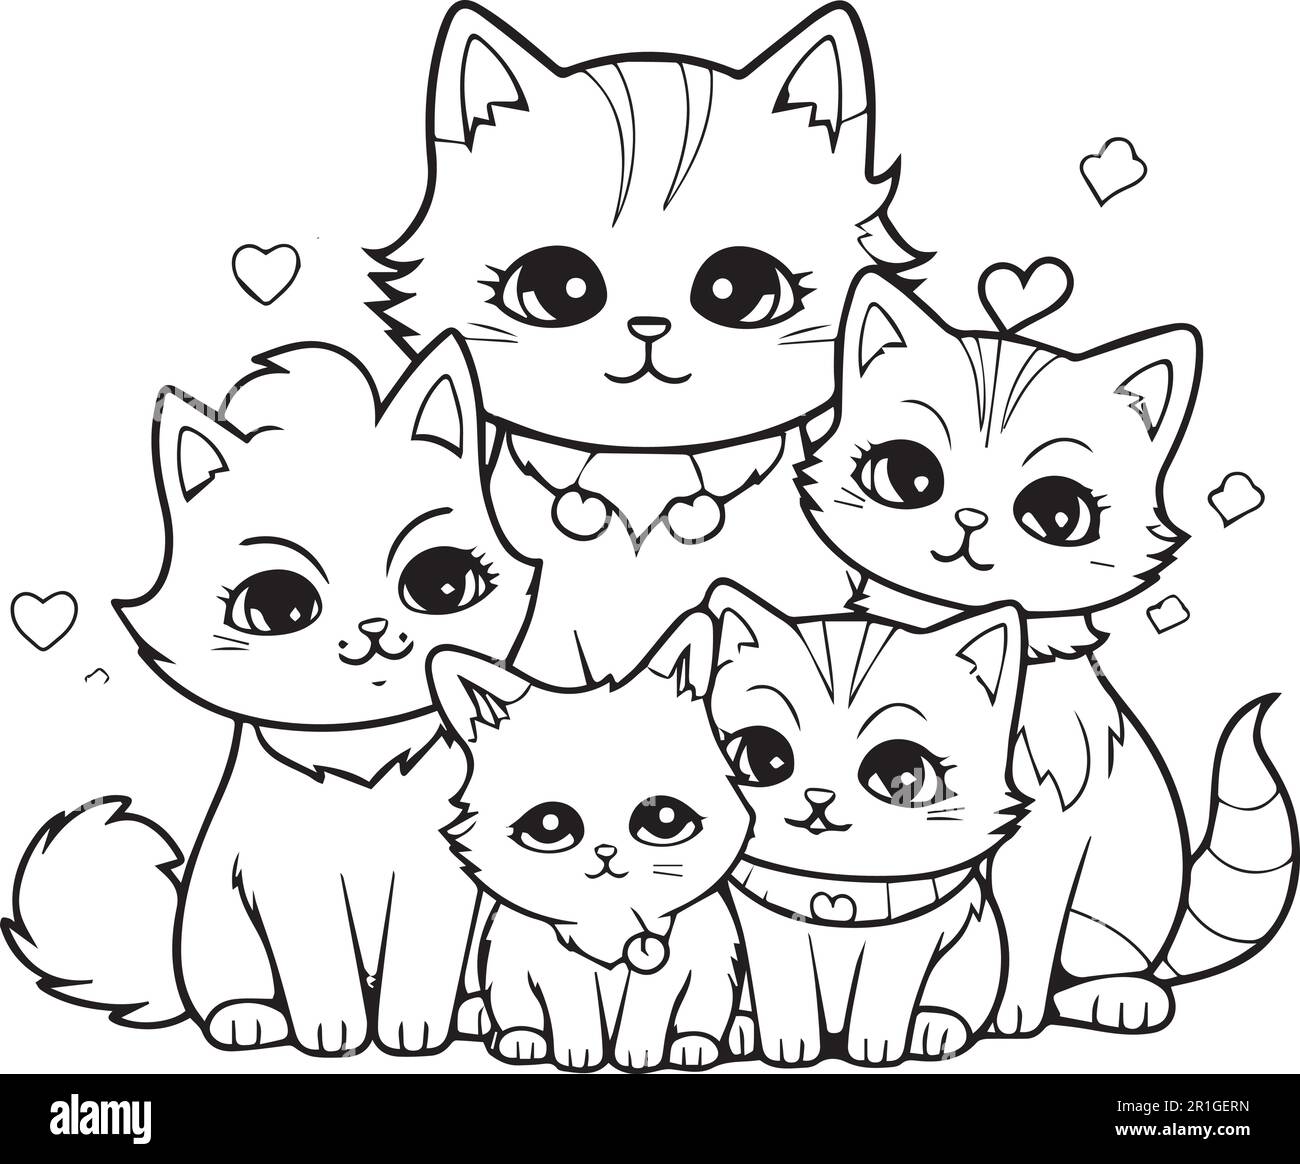 A coloring book page of a family of cats. Stock Vector